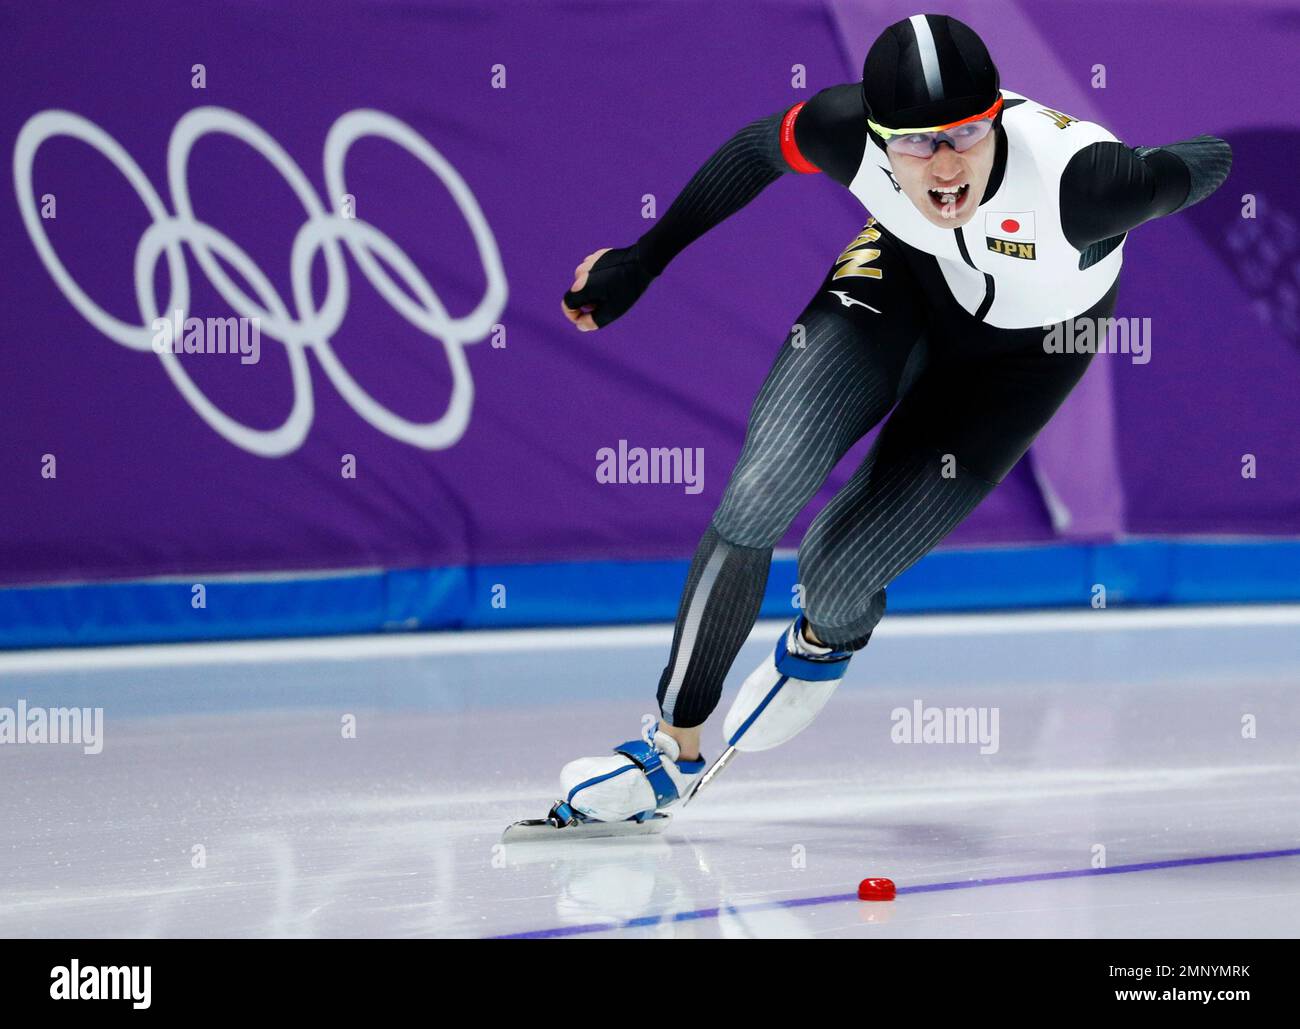 Shane Williamson of Japan competes during the men's 1,500 meters  speedskating race at the Gangneung Oval at the 2018 Winter Olympics in  Gangneung, South Korea, Tuesday, Feb. 13, 2018. (AP Photo/John Locher